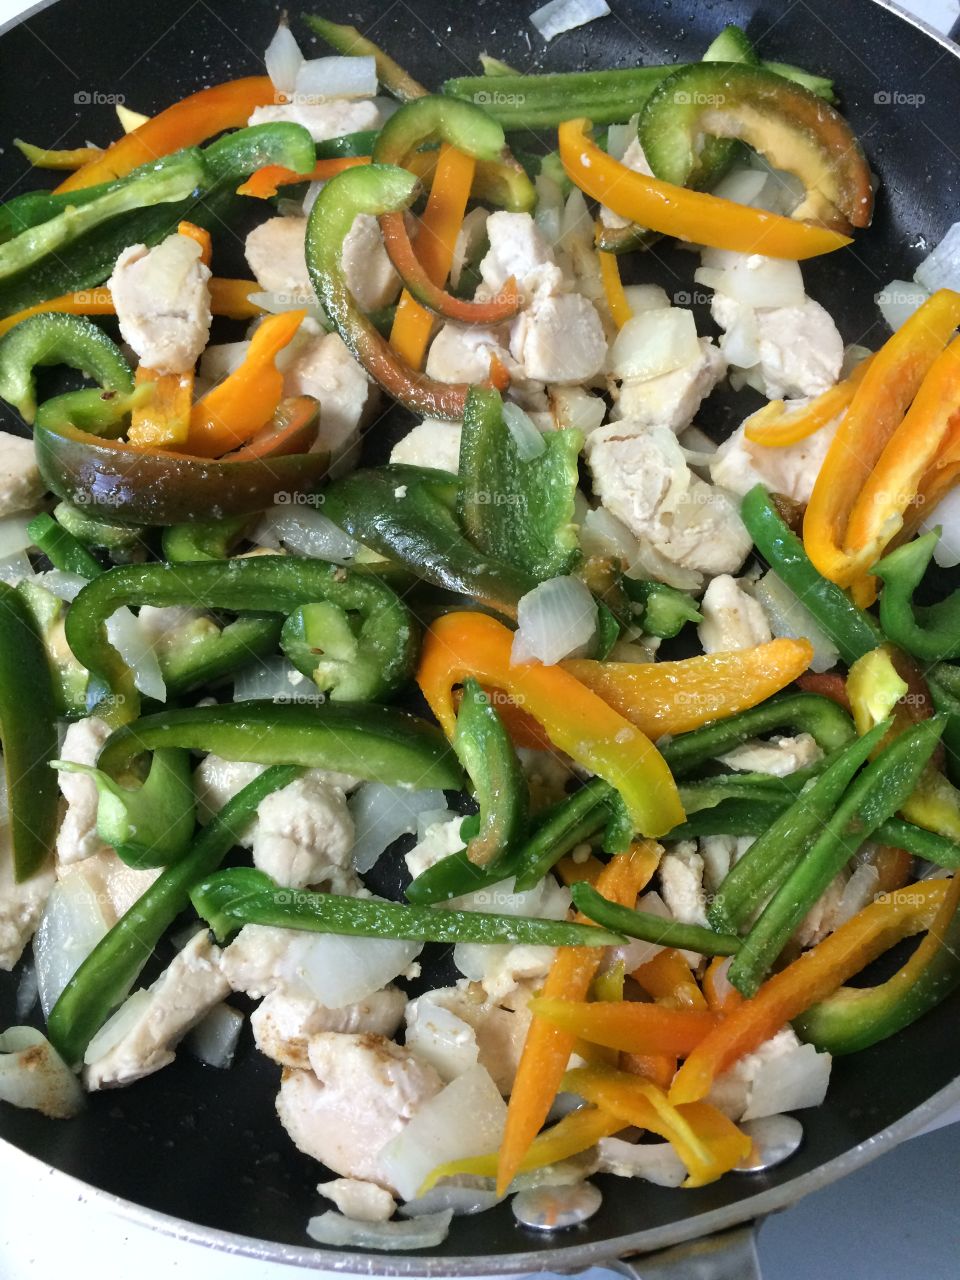 Homegrown peppers with onions and chicken.